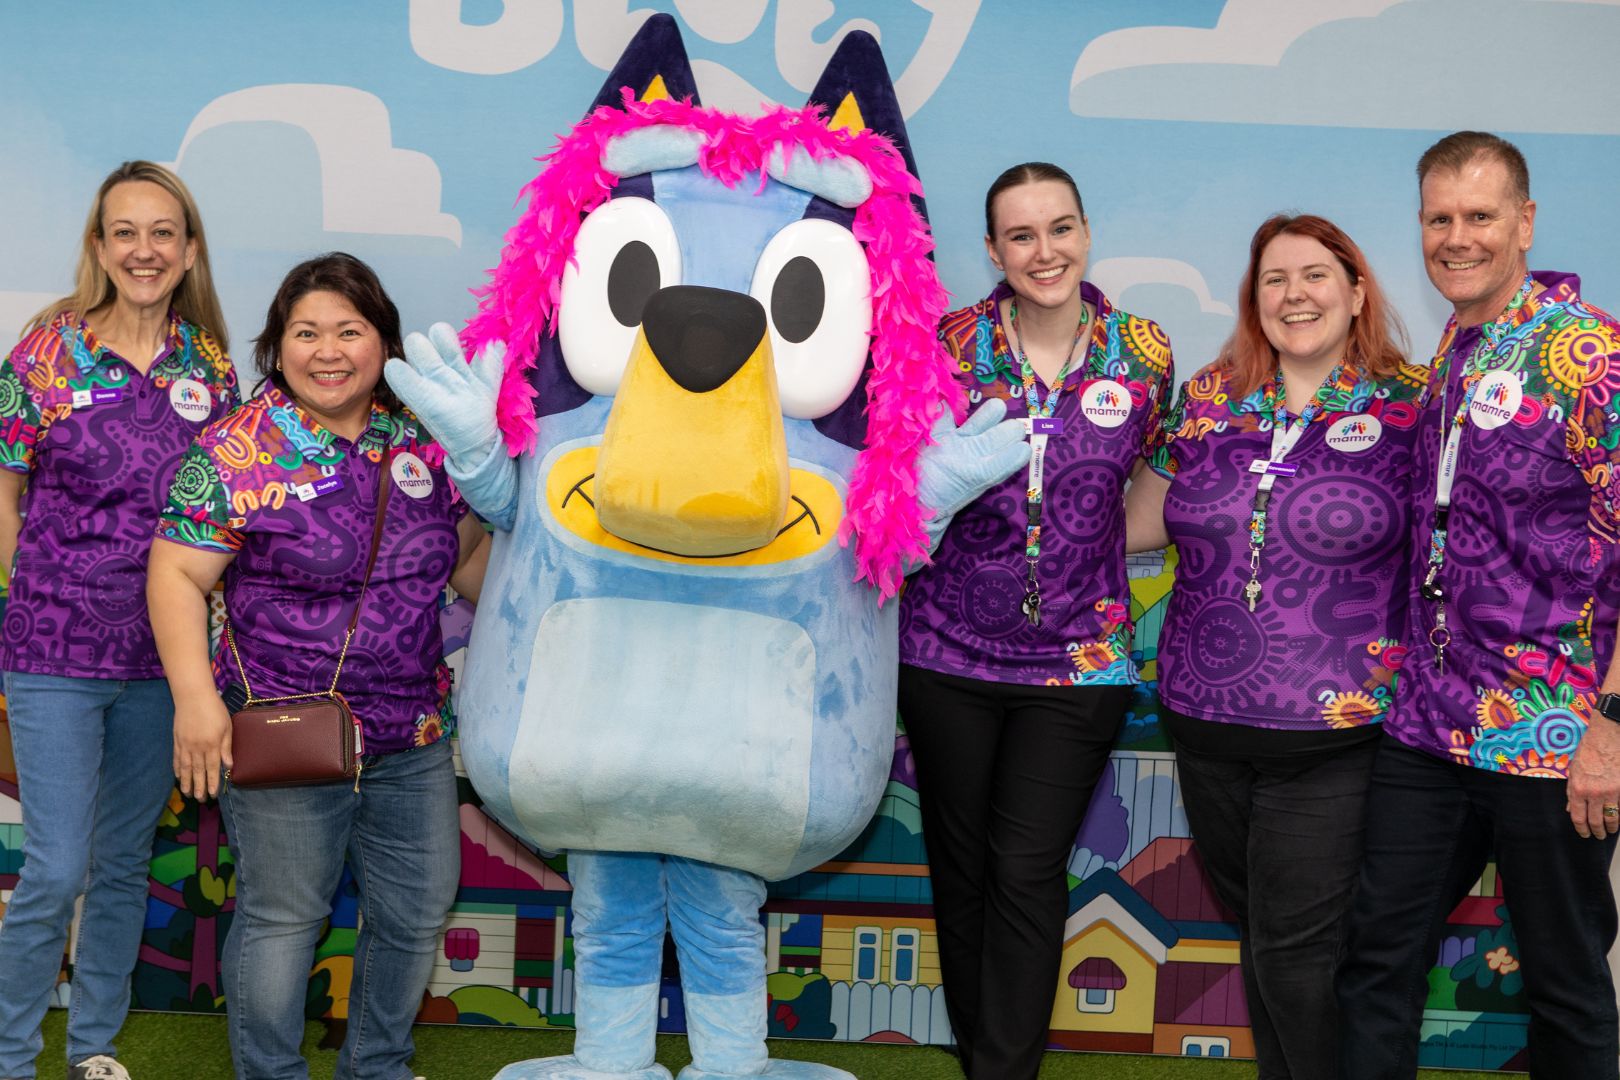 Mamre staff members group together for a photo with Bluey